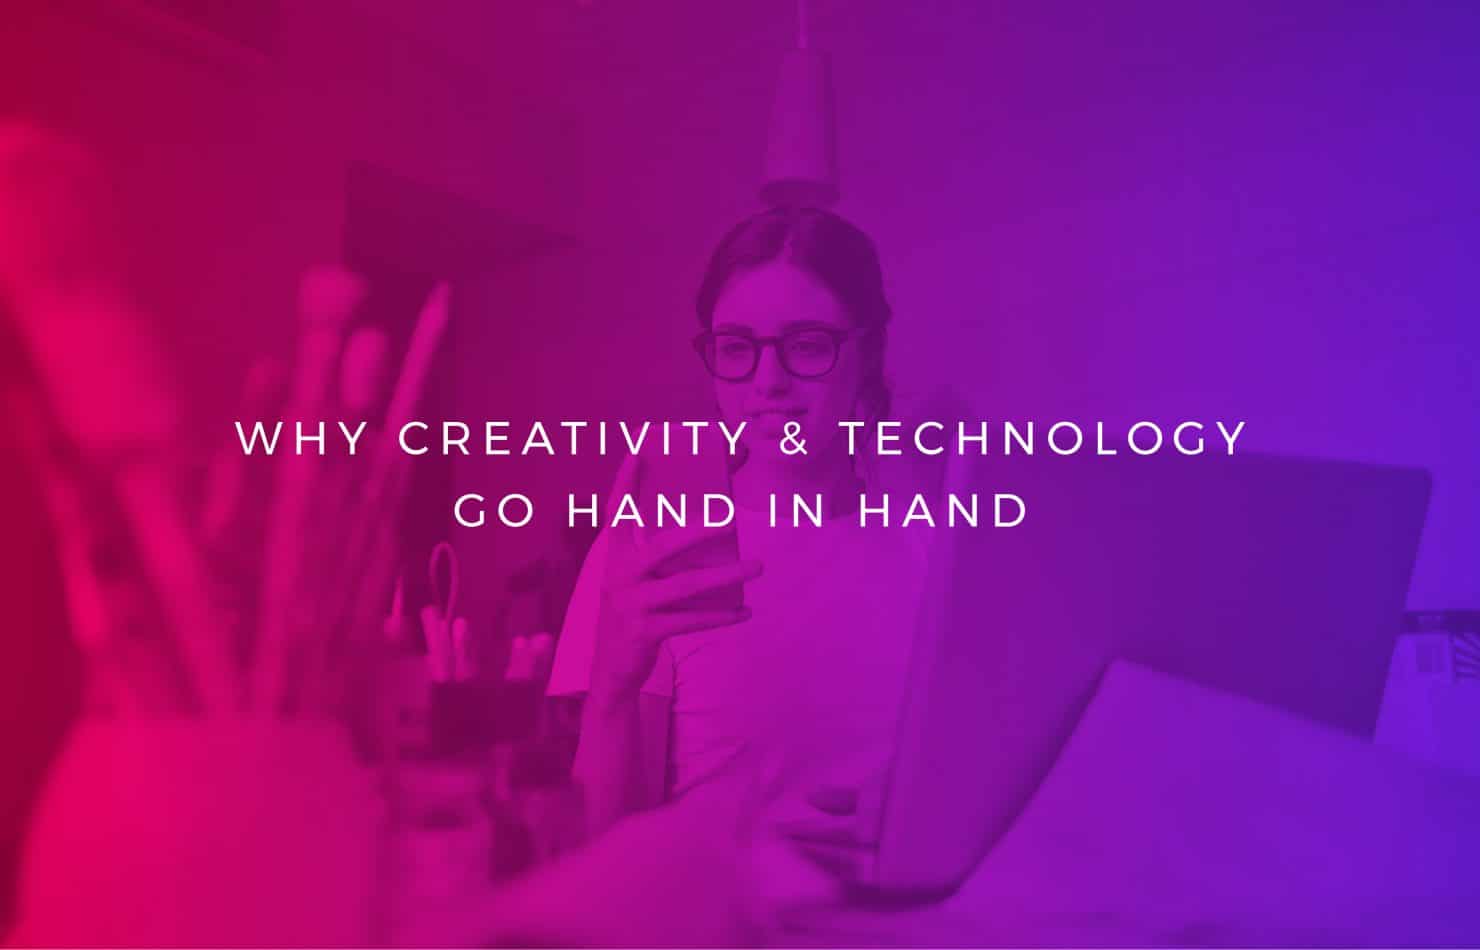 Why creativity and technology go hand in hand